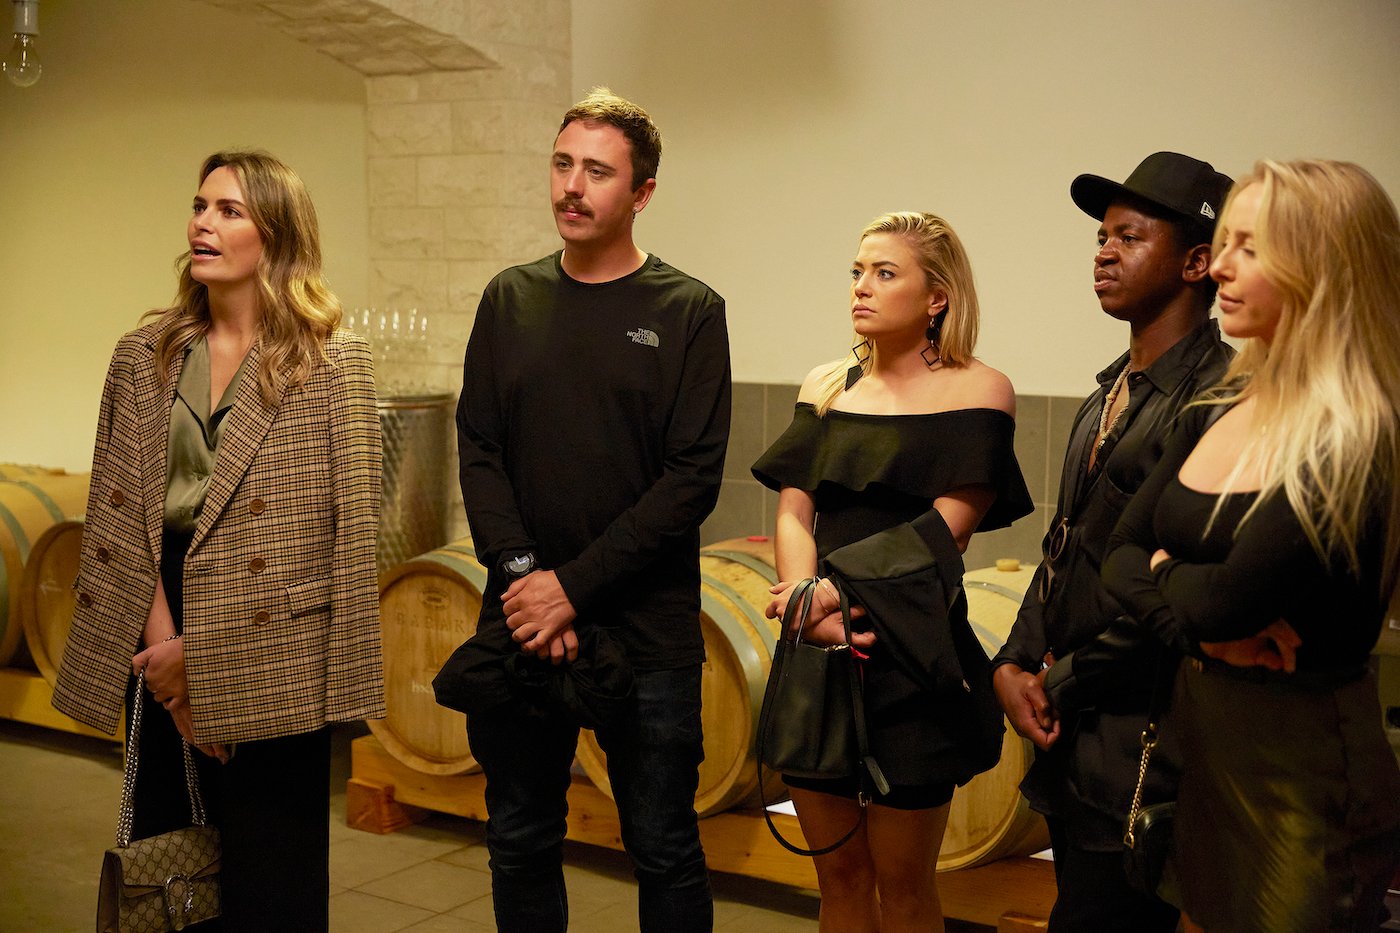 'Below Deck Med' crew gather at a winery